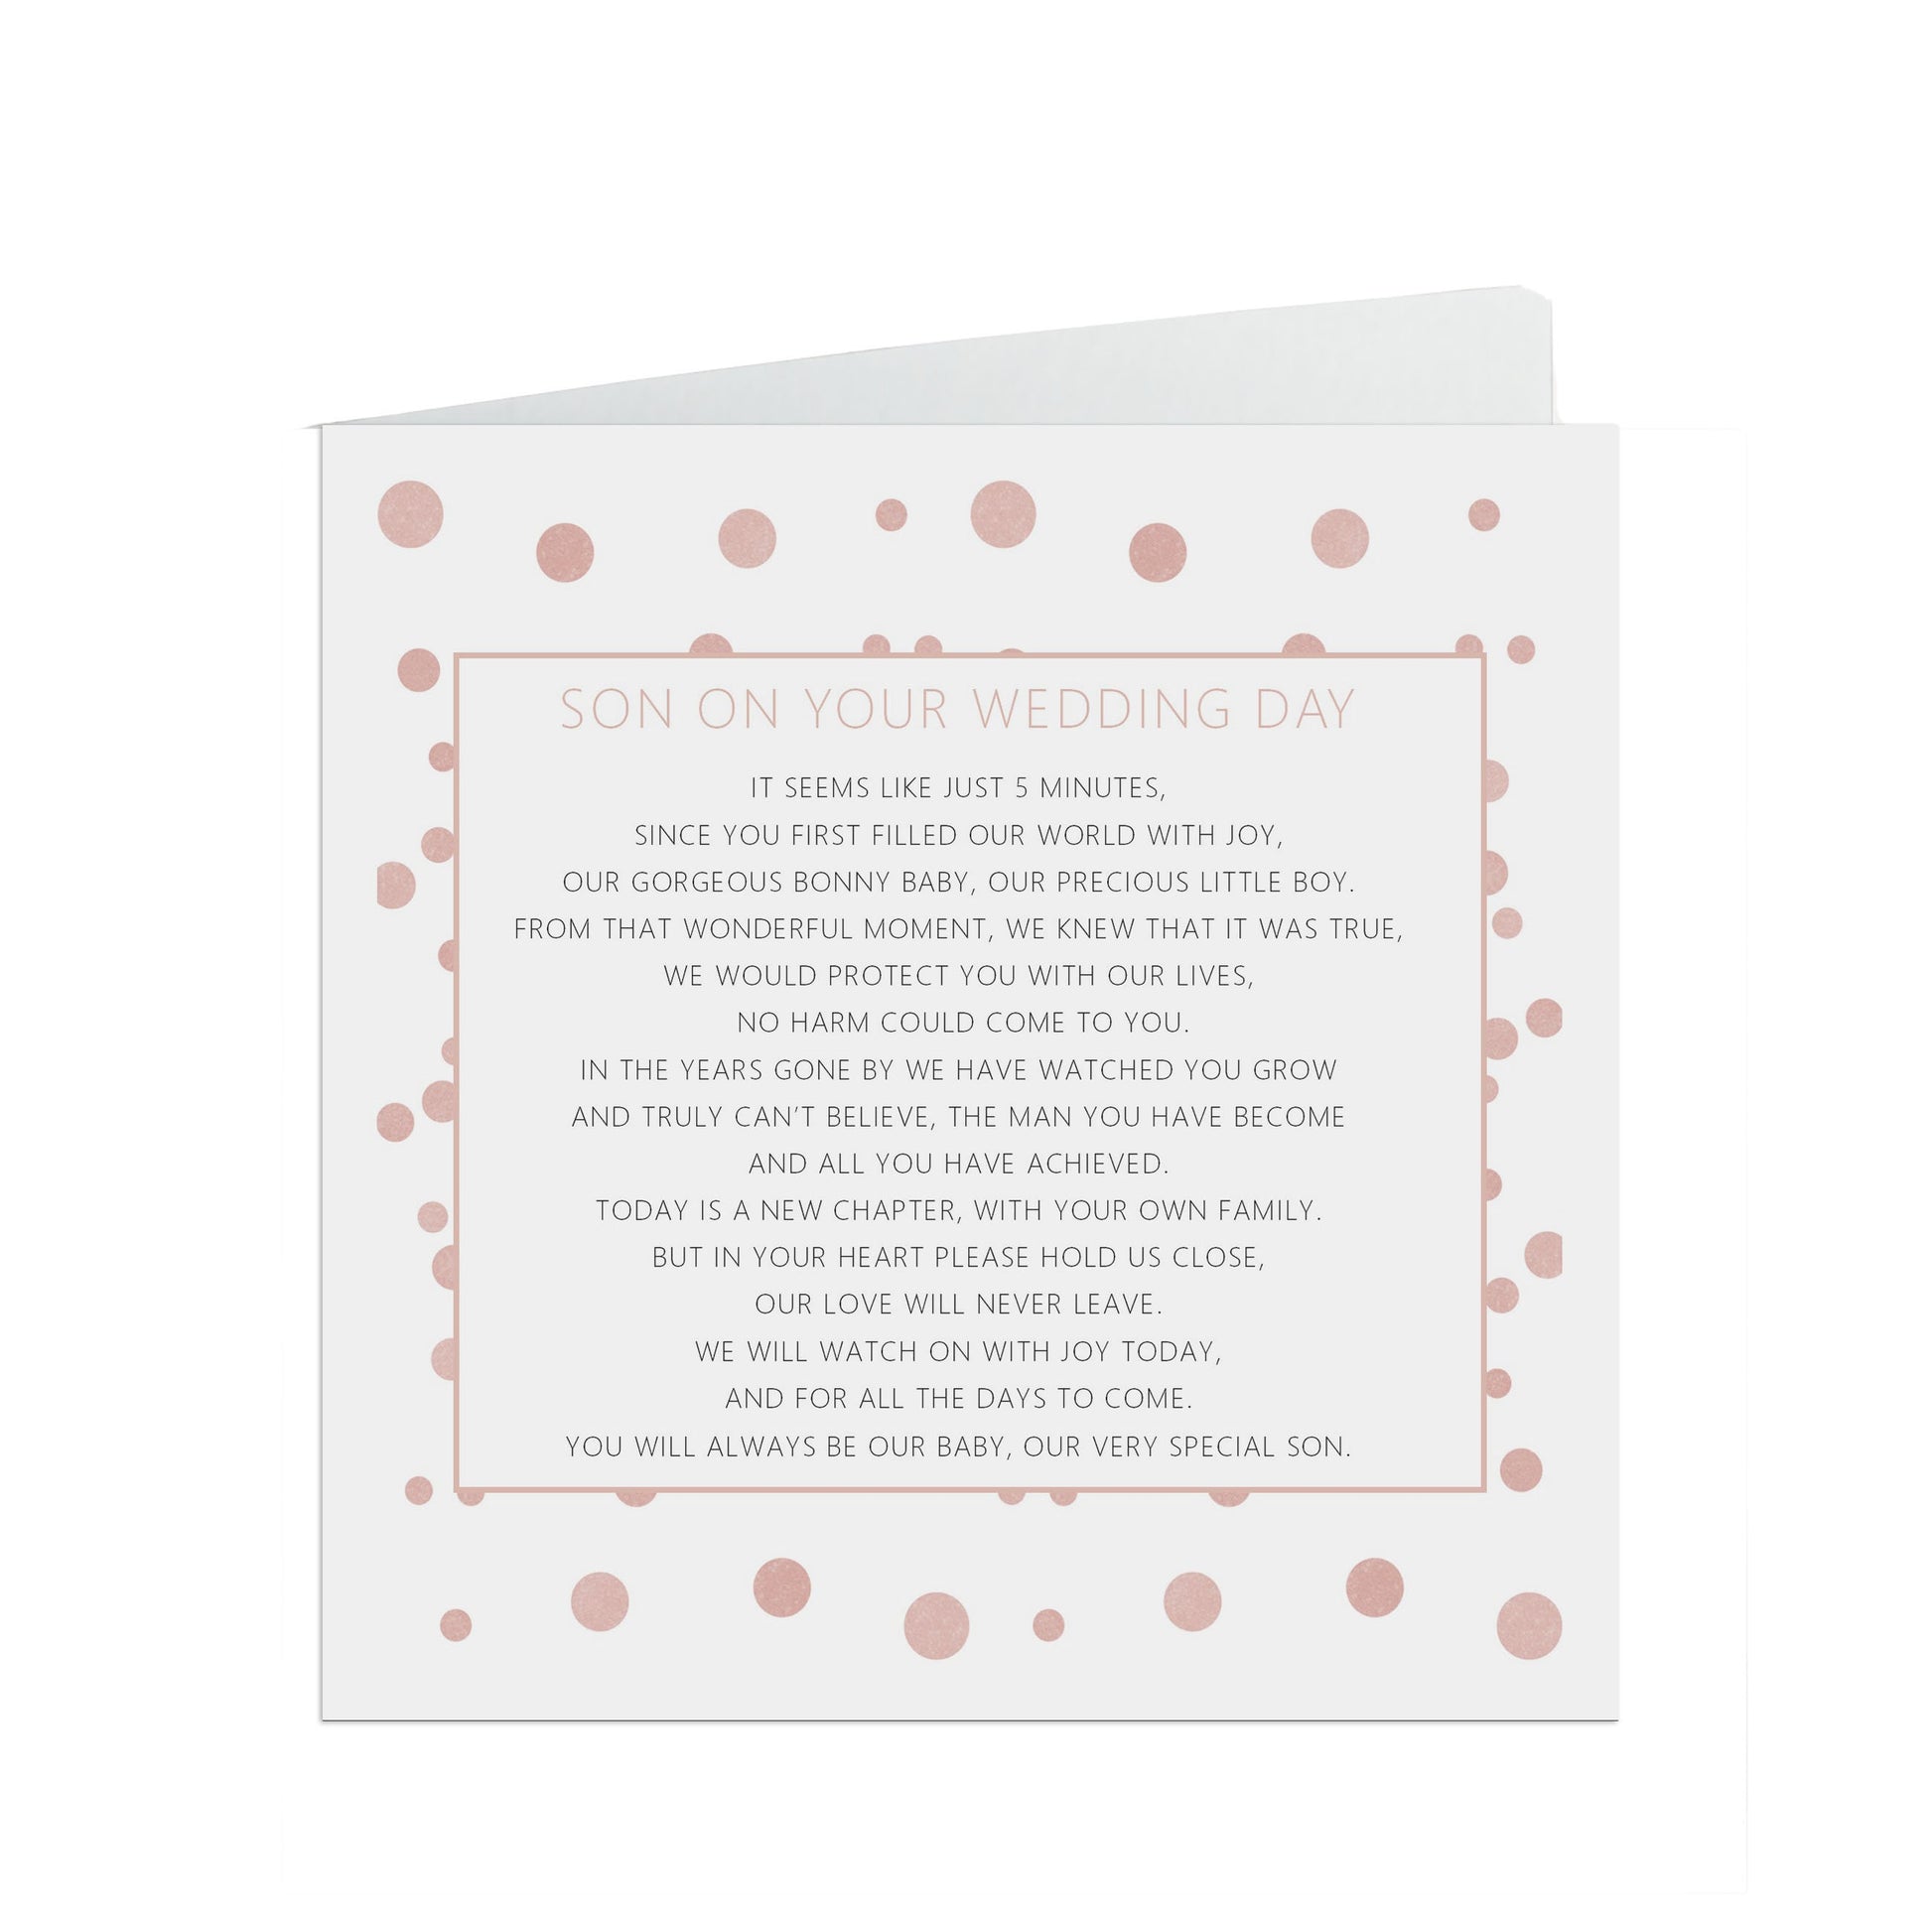 Son On Your Wedding Day Card, Blush Confetti 6x6 Inches With A White Envelope